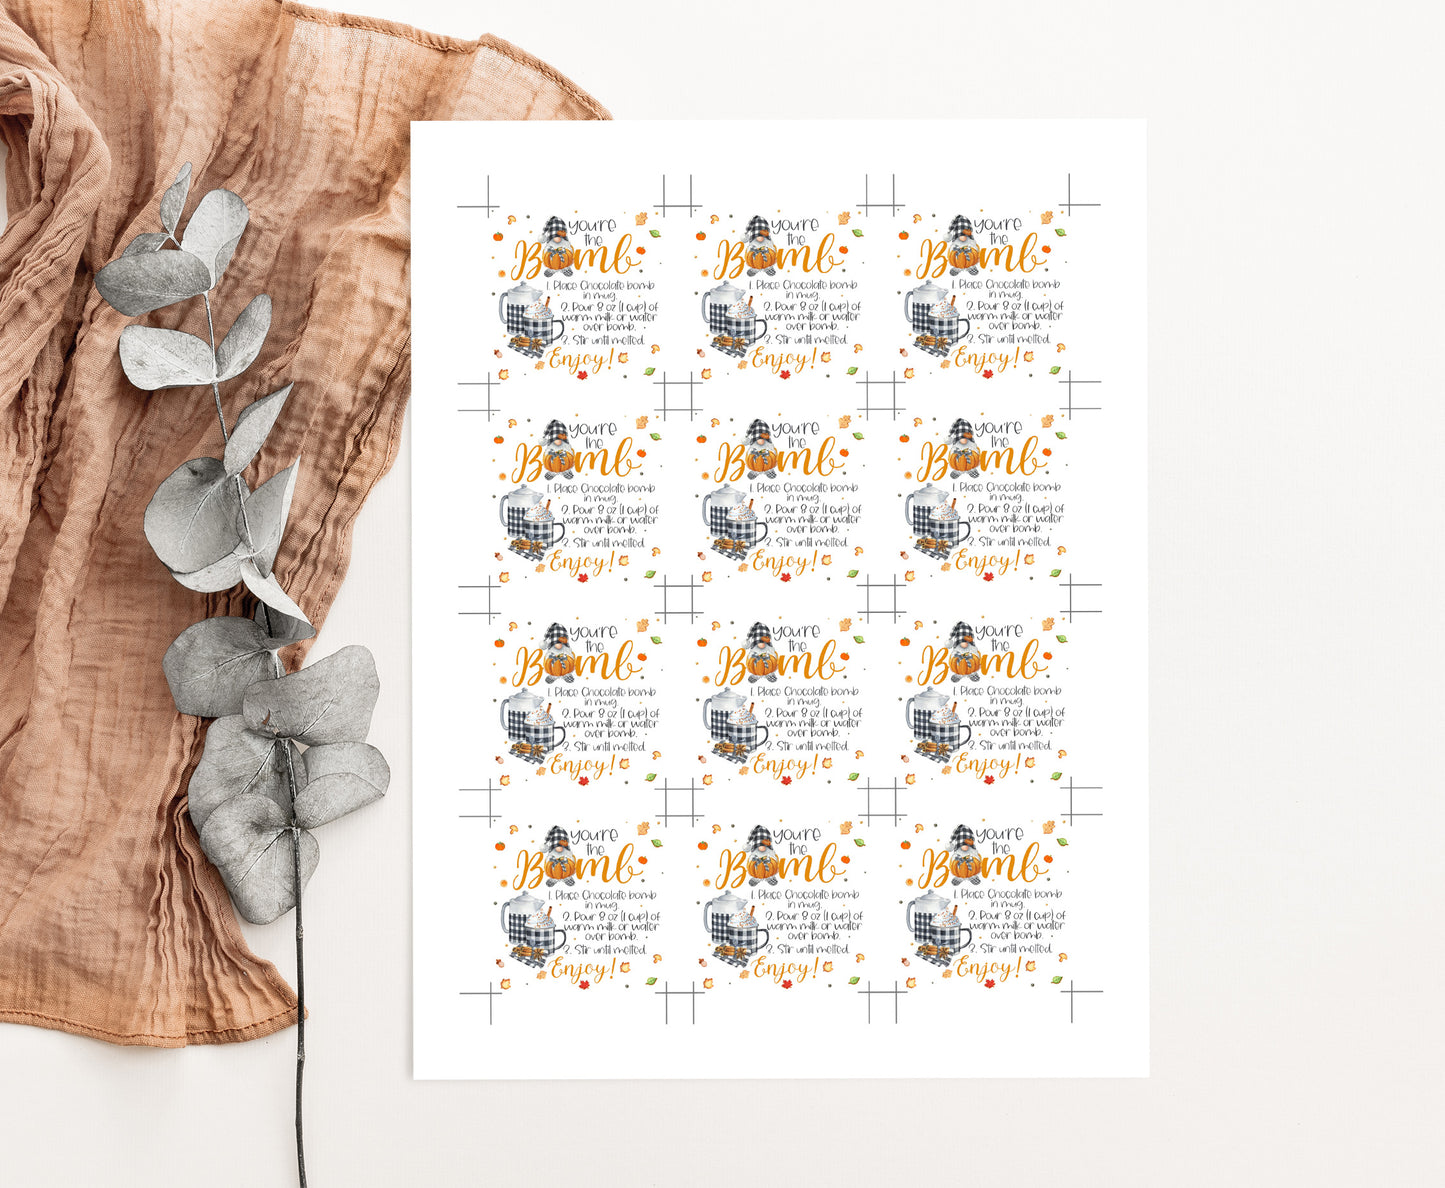 You're the Bomb Tags 2"x2" | Thanksgiving Favor Tags - 30